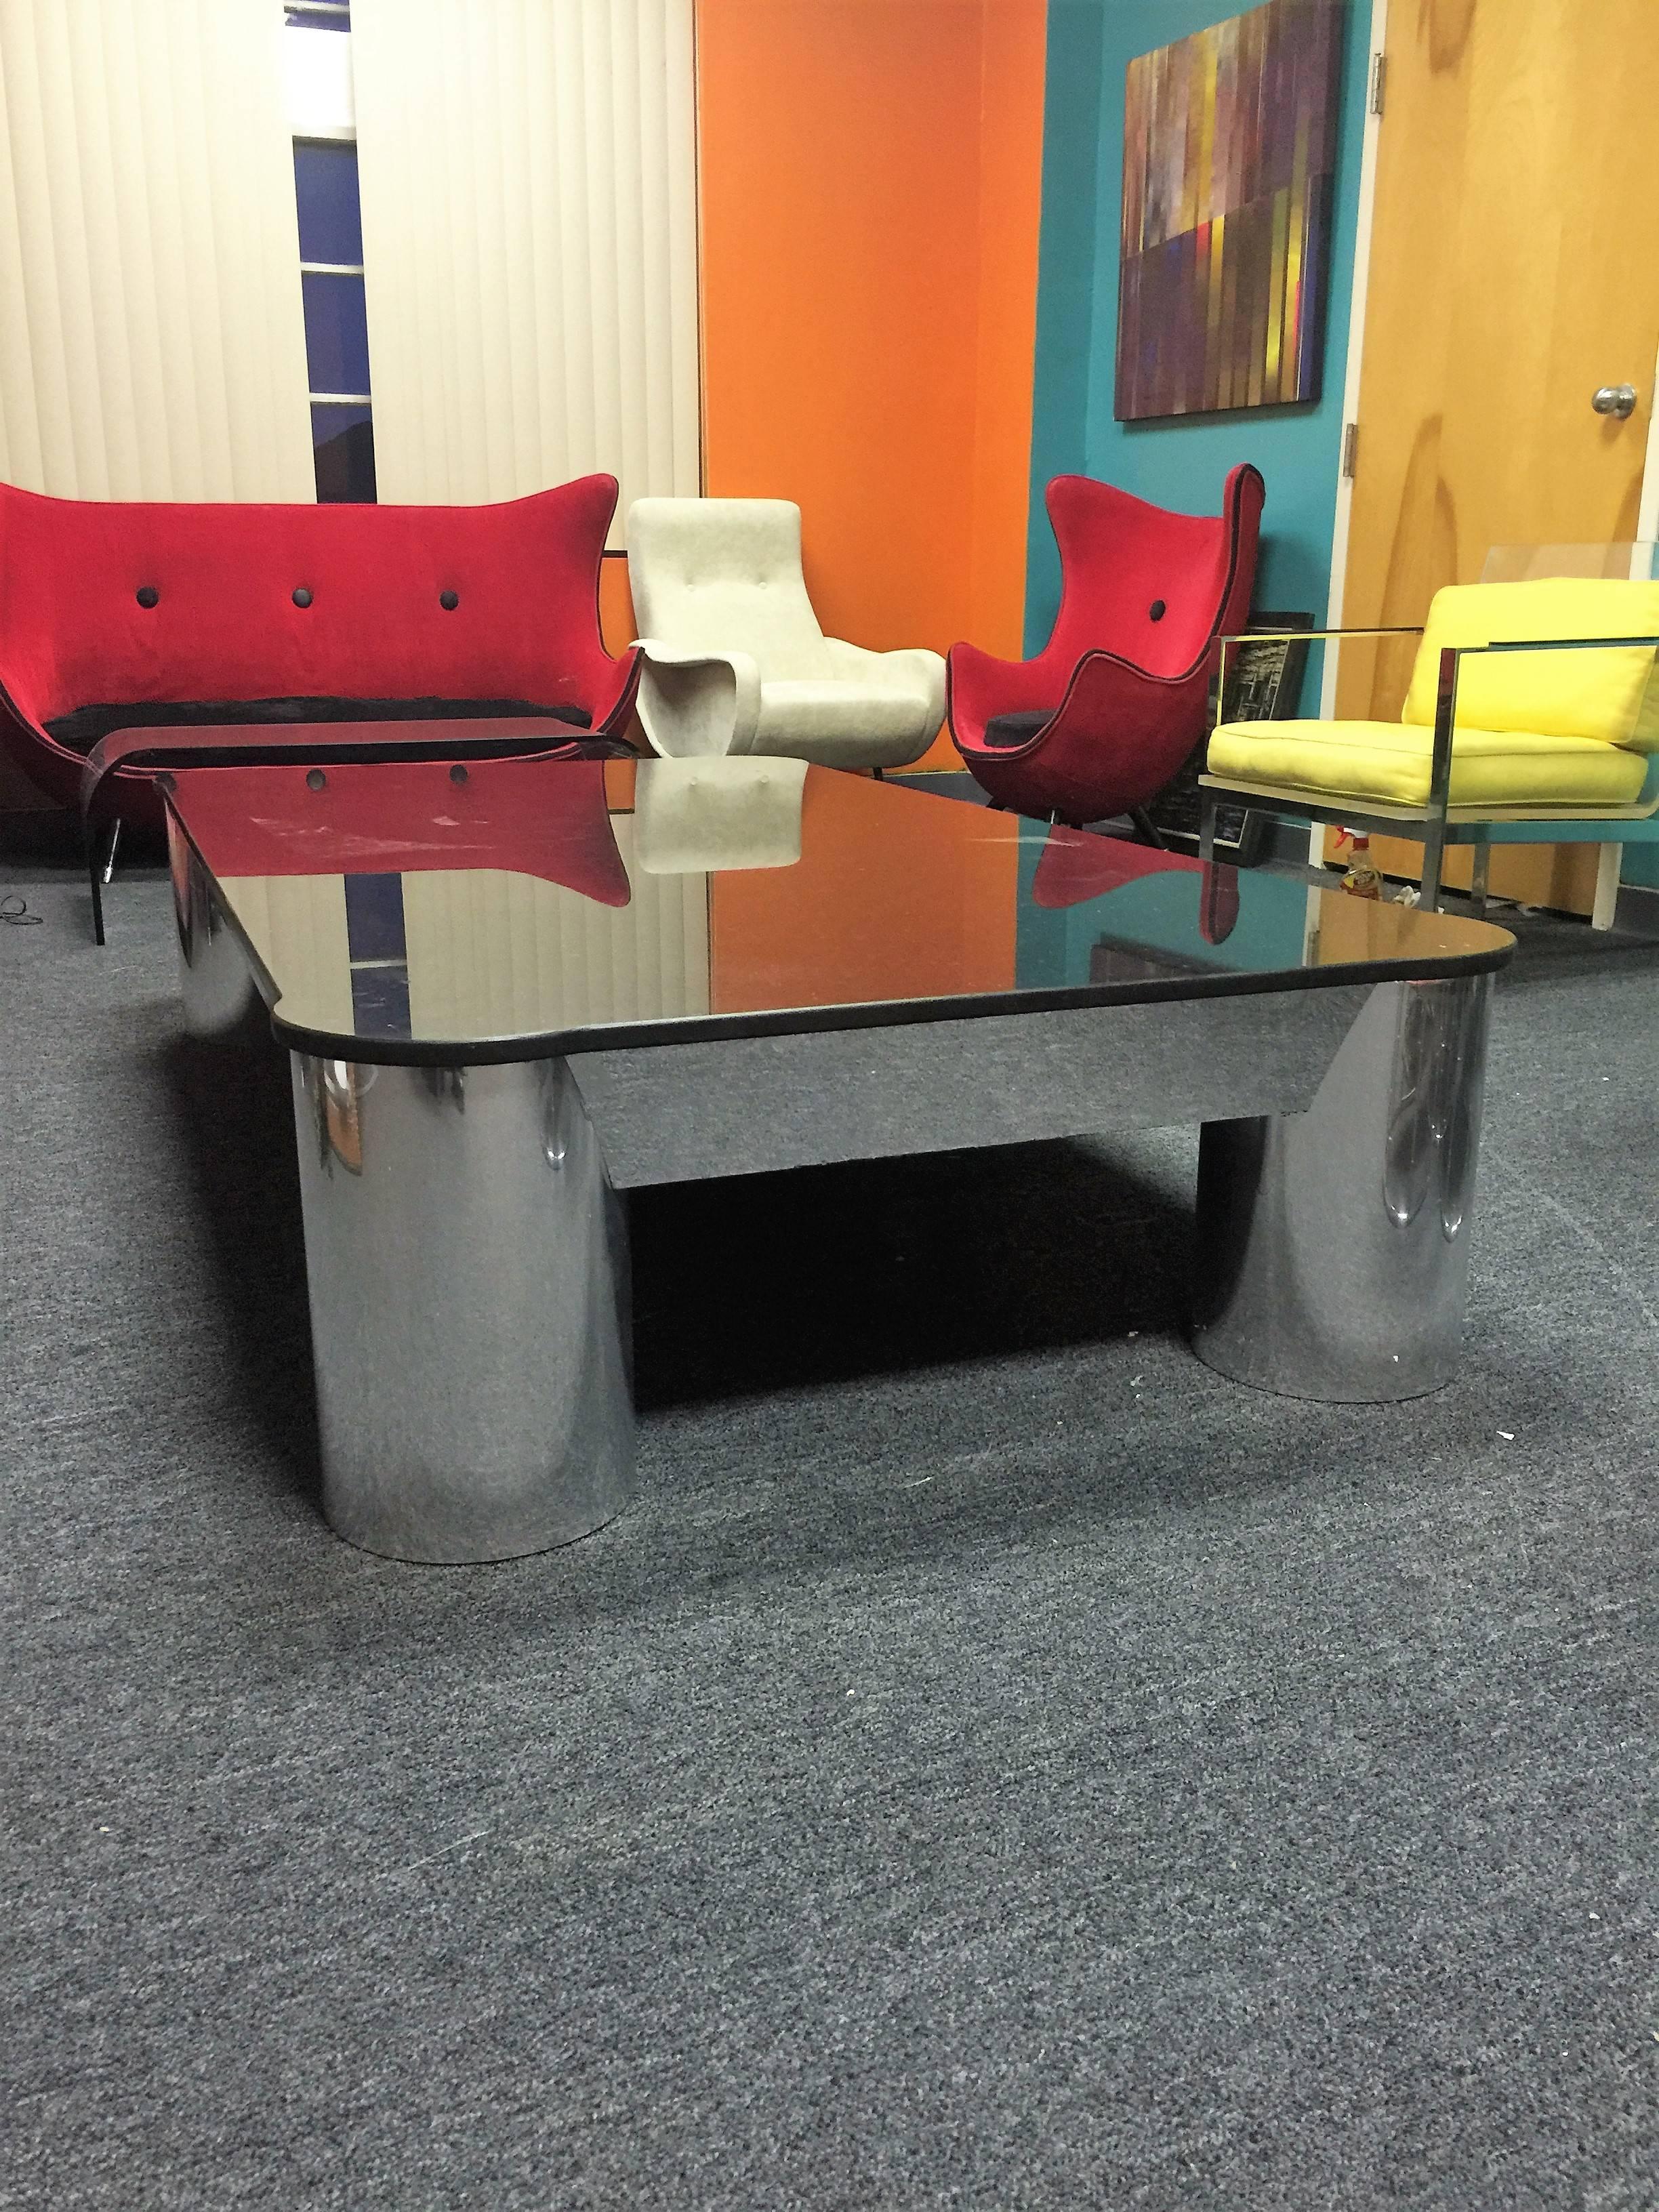 Amazing heavy polished black granite topped modernistic design coffee table formed with chromed metal steel over a solid wood form base with four cylinder form legs. An extraordinary mammoth custom coffee table that is solid and striking. The